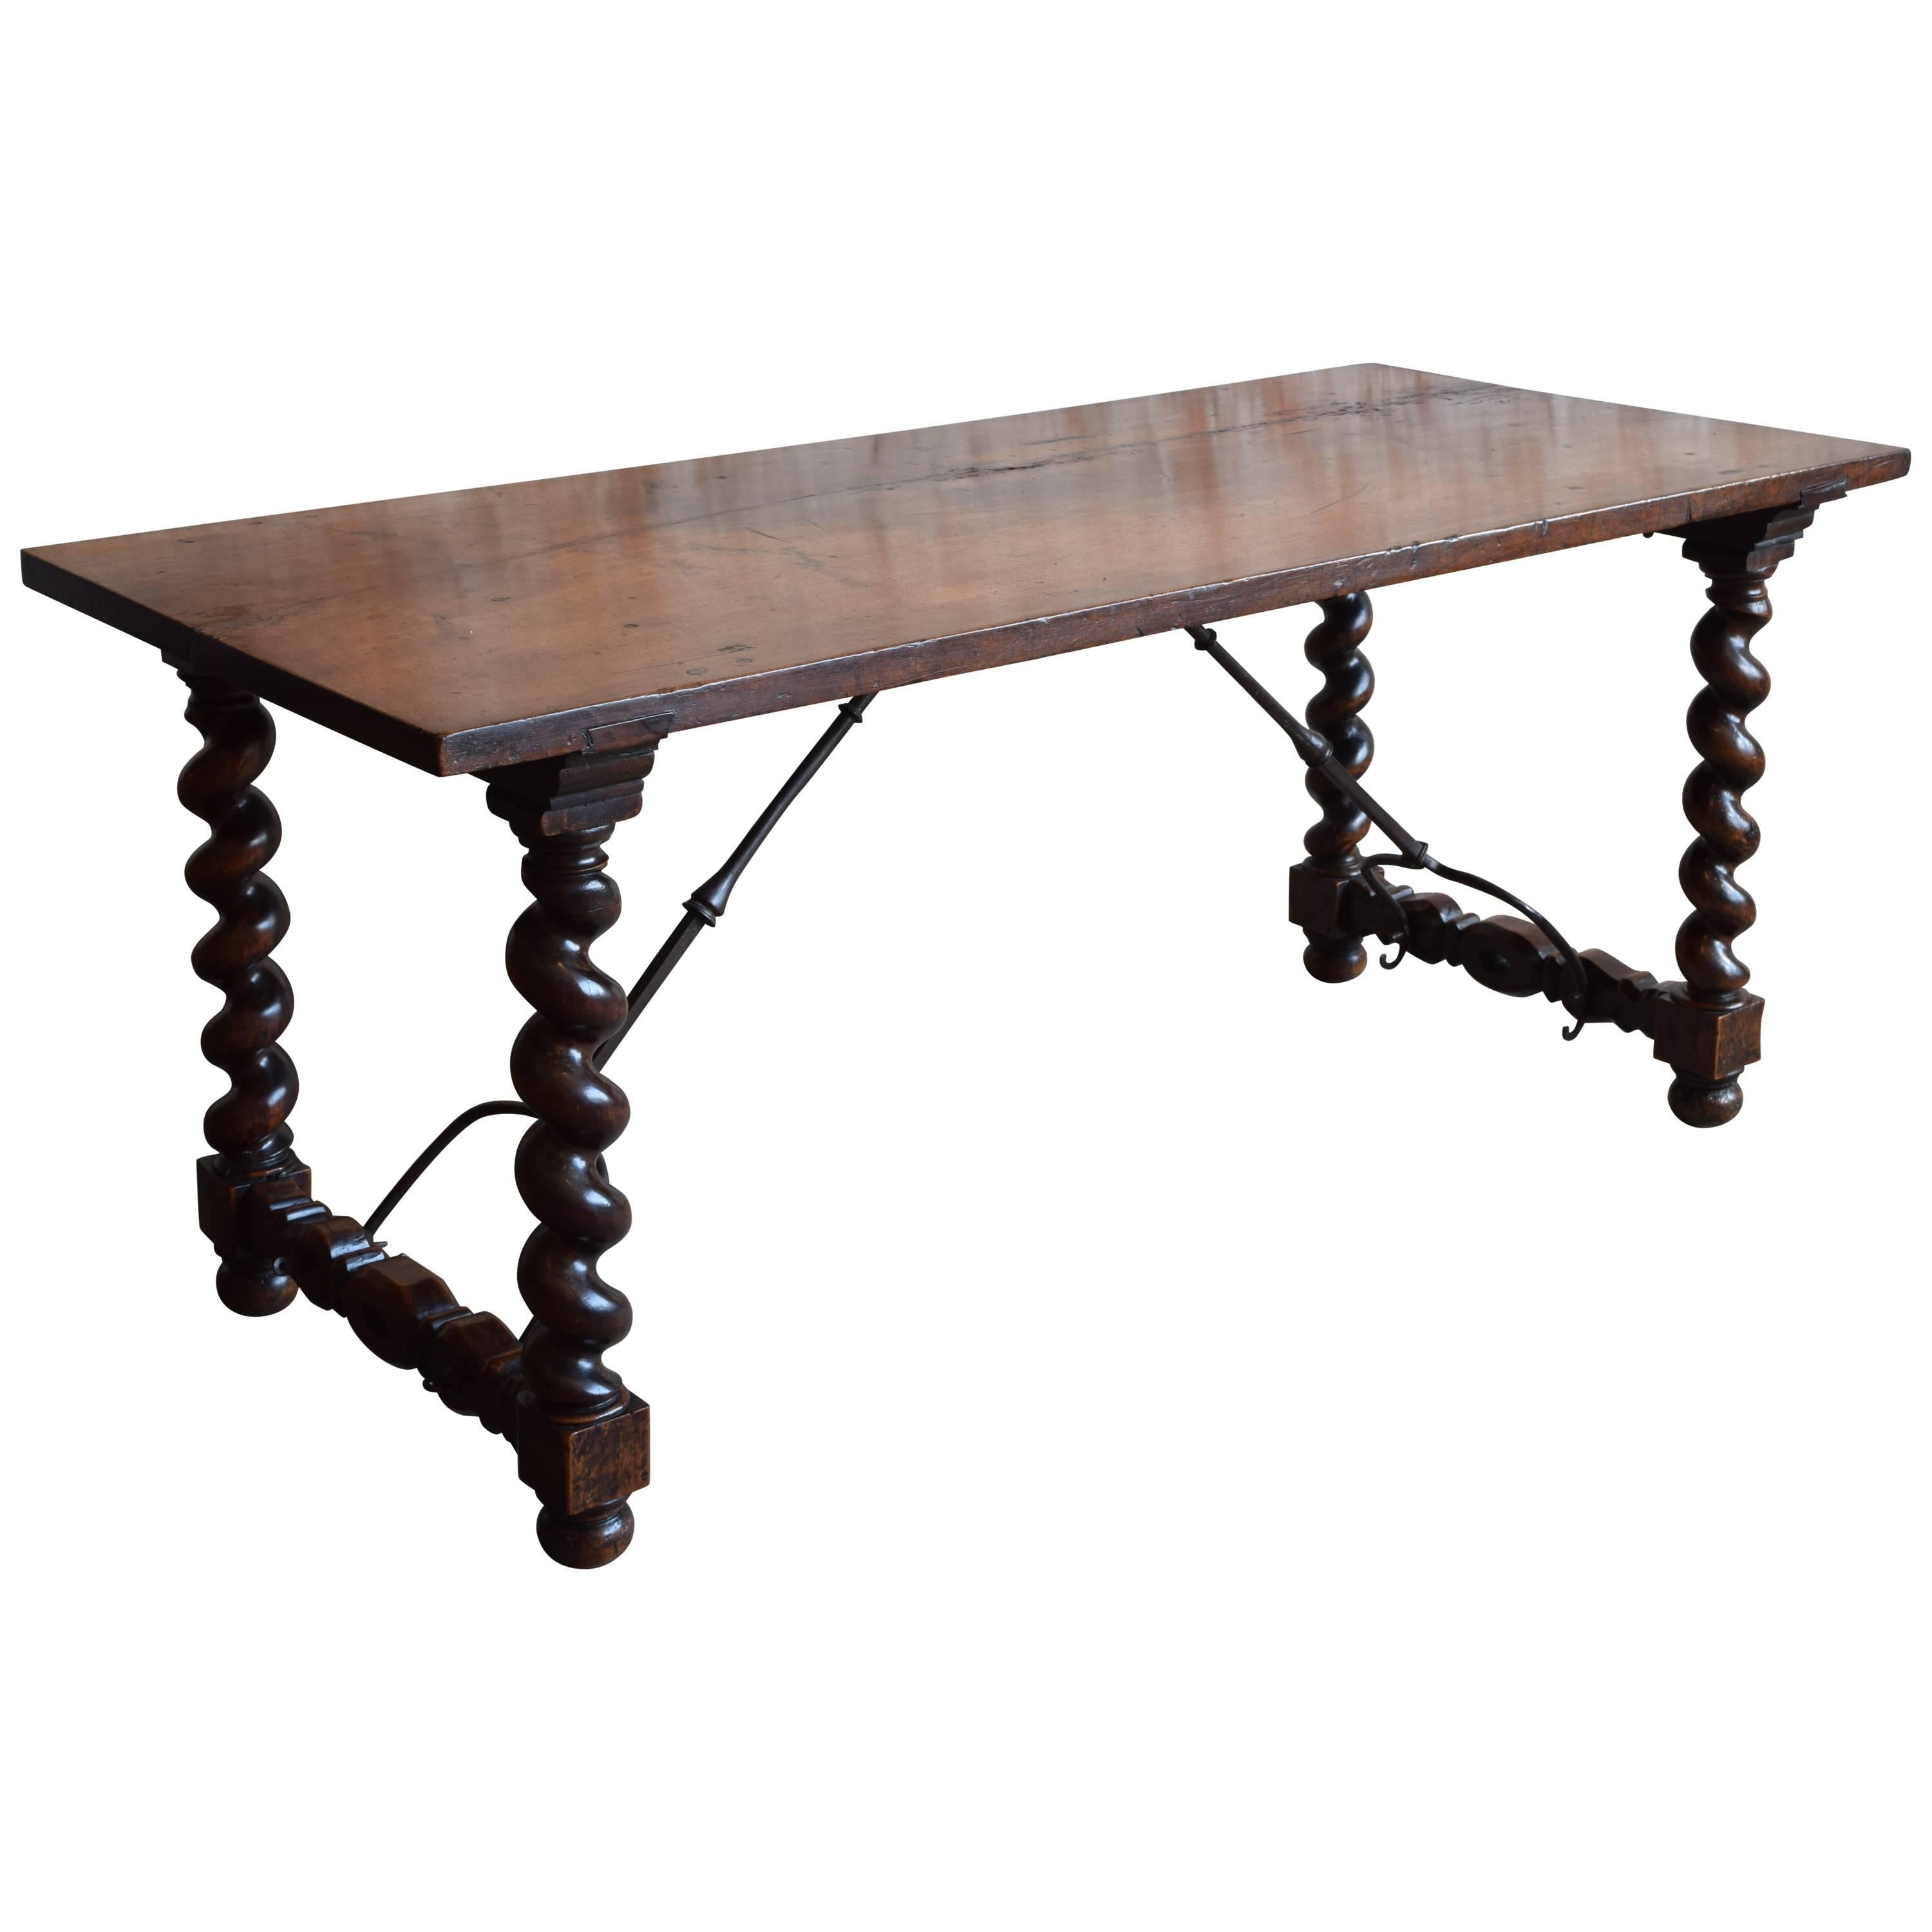 French Louis XIII Period Turned Walnut & Wrought Iron Table, Early 18th Century